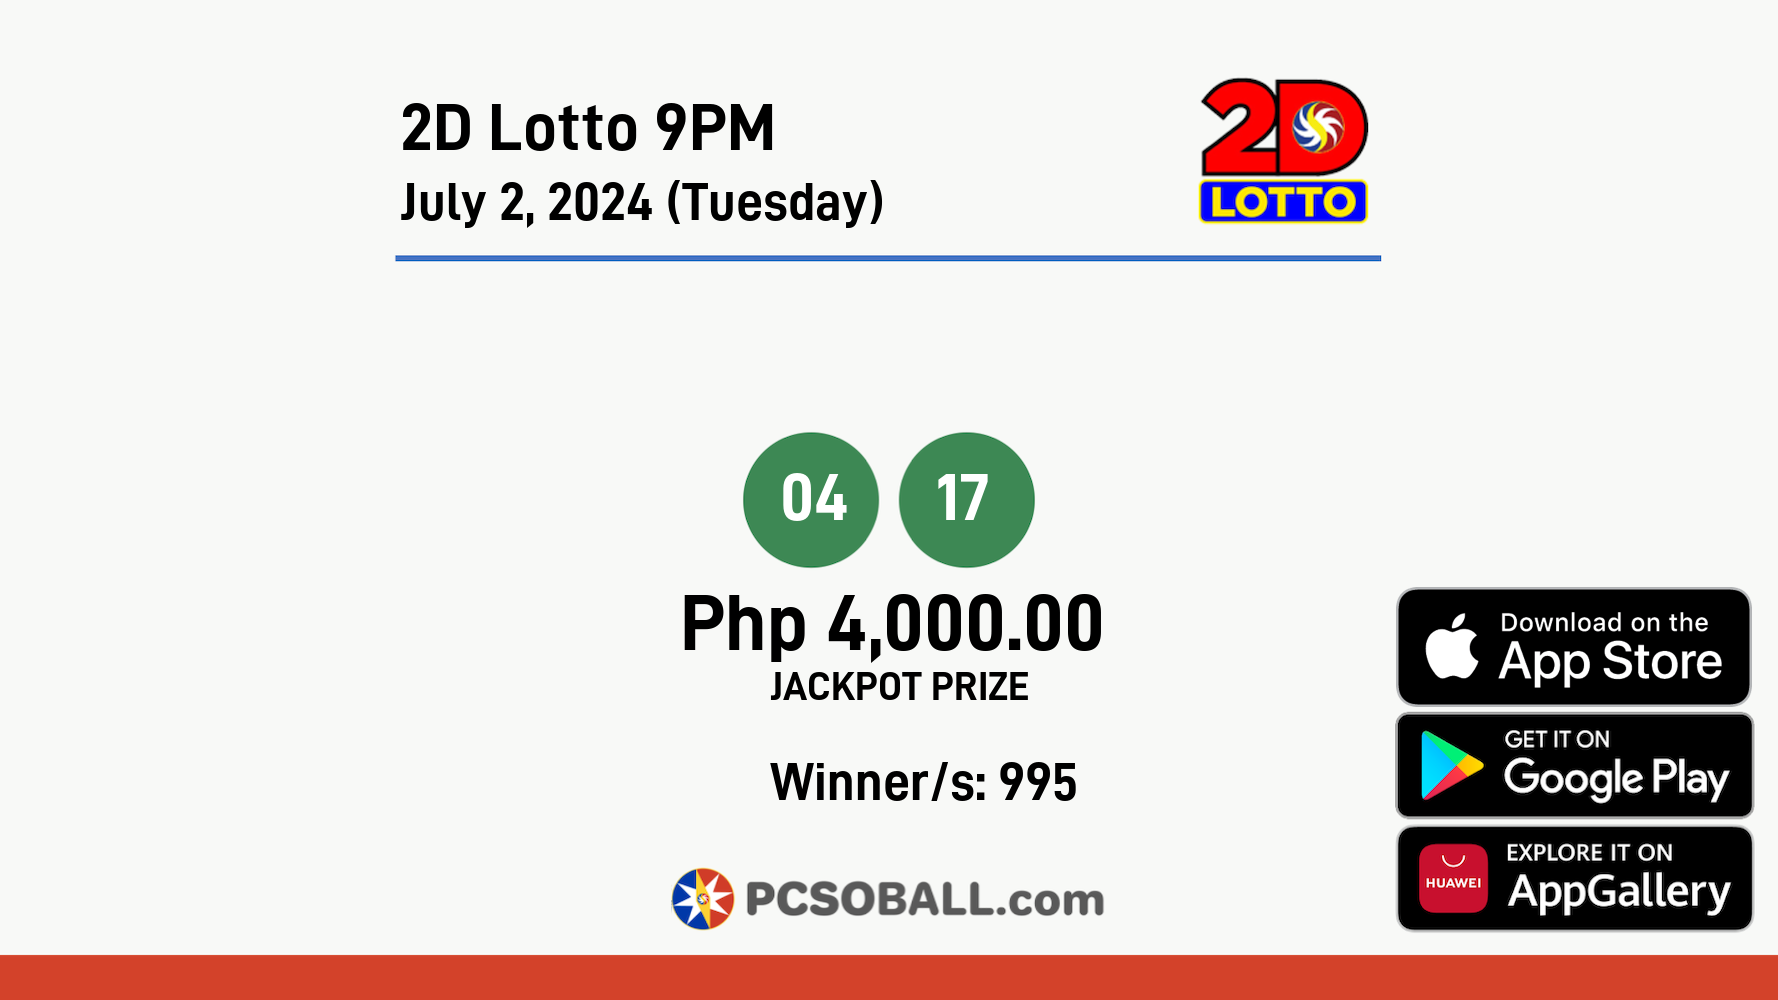 2D Lotto 9PM July 2, 2024 (Tuesday) Result